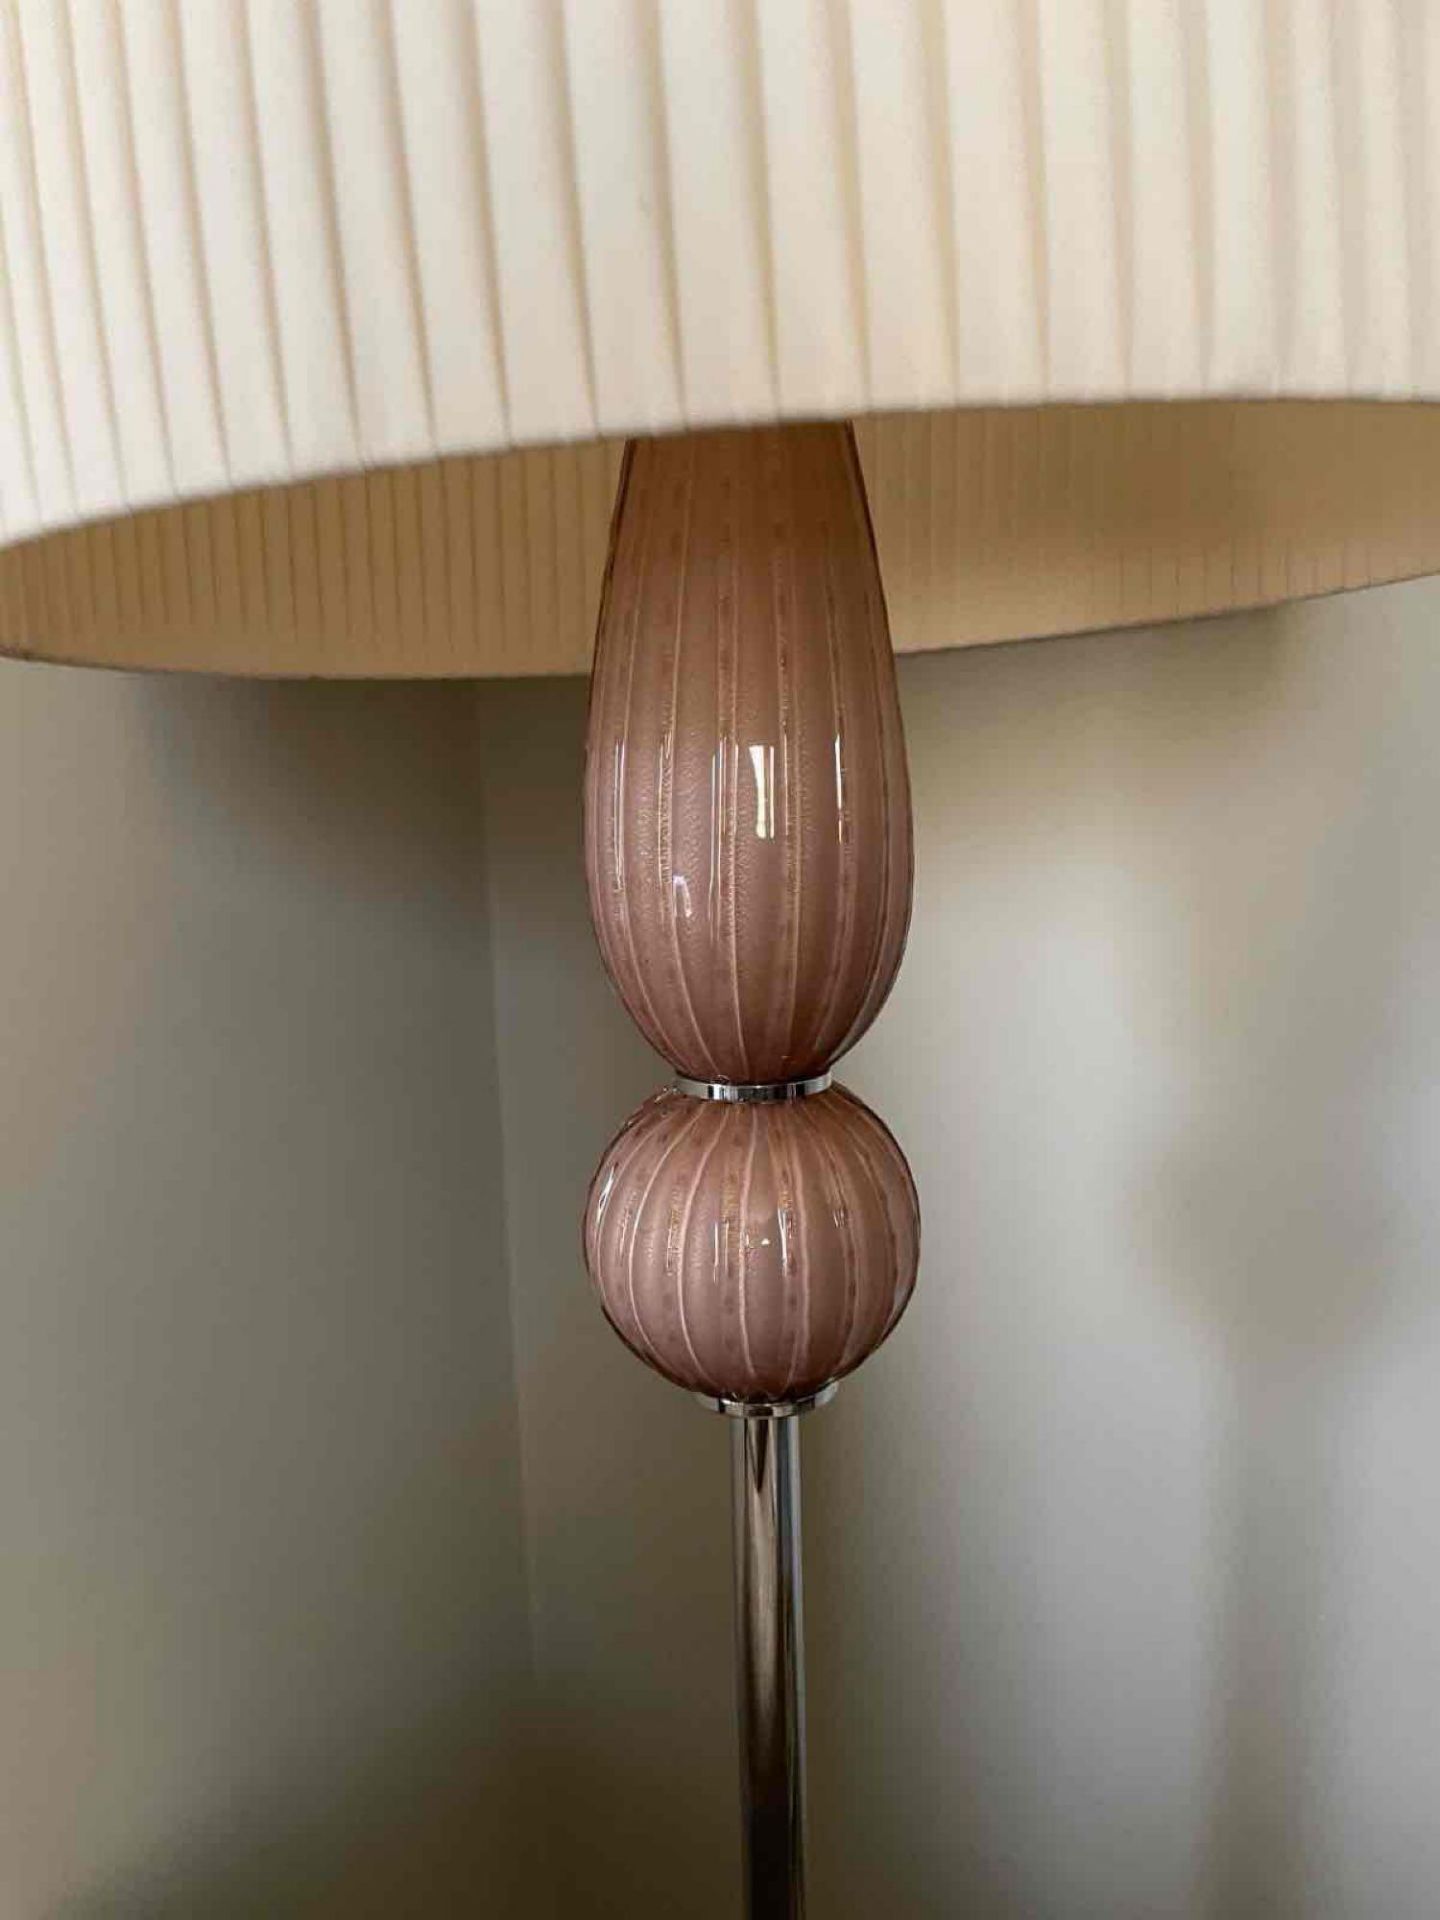 A Murano Glass with stainless steel base floor standing lamp W 500 x D 500 x H 1575 mm - Image 6 of 8